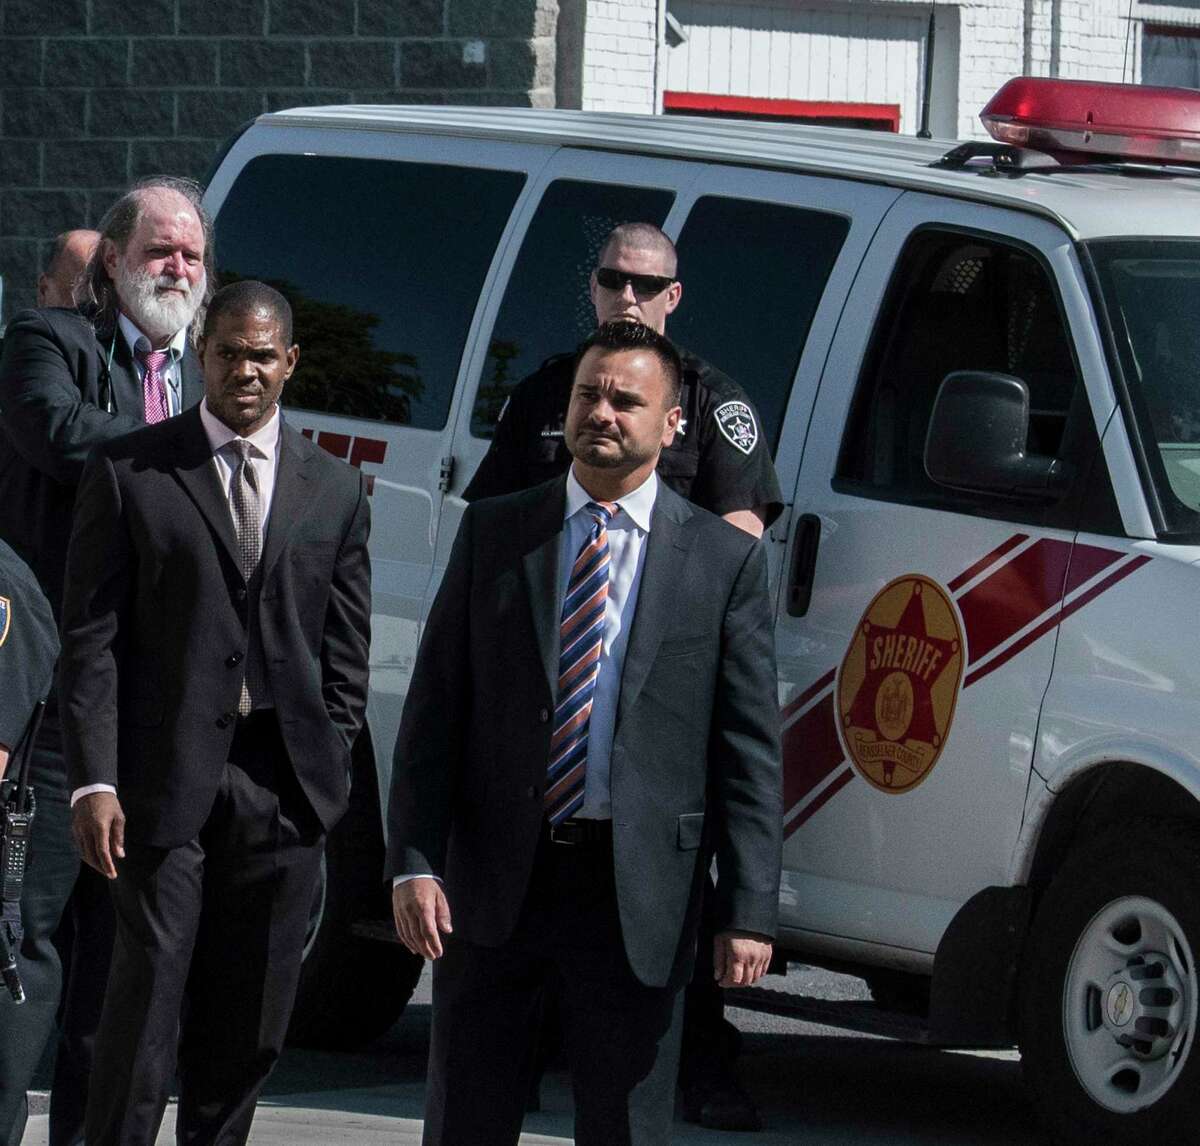 With a significant security detail New York State Supreme Court Judge Andrew Ceresia, center, looks south on 5th Avenue as a prisoner van containing Richard Wright, background, sits in sight of the entourage during a tour of the structures that were involved with the murder and arson case of Richard Wright Thursday July 12, 2018 in Troy, N.Y. (Skip Dickstein/Times Union)